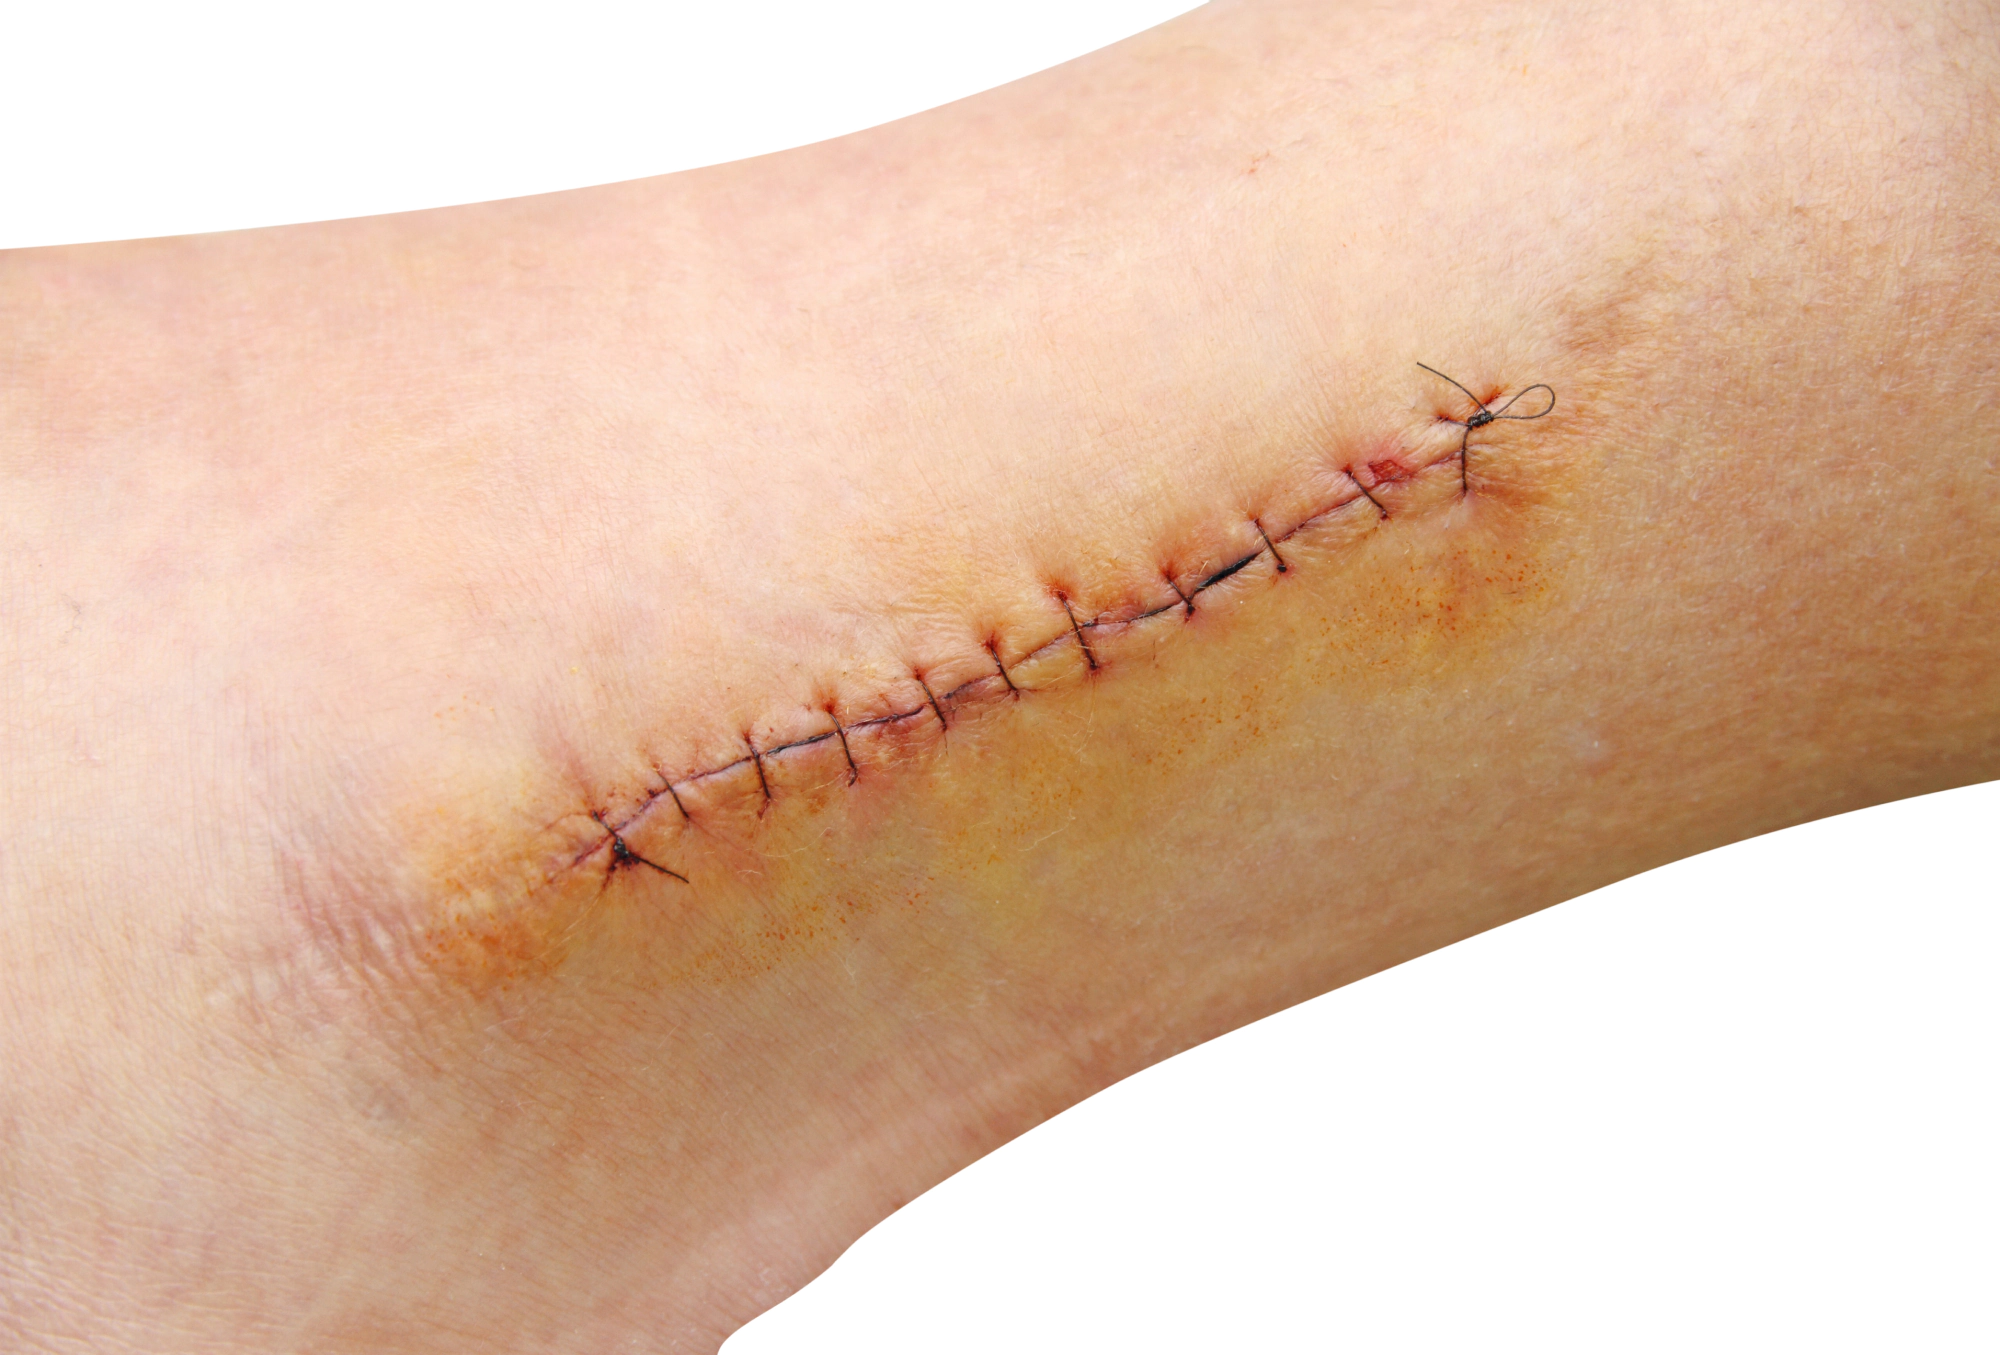 When Does a Cut Need Stitches?